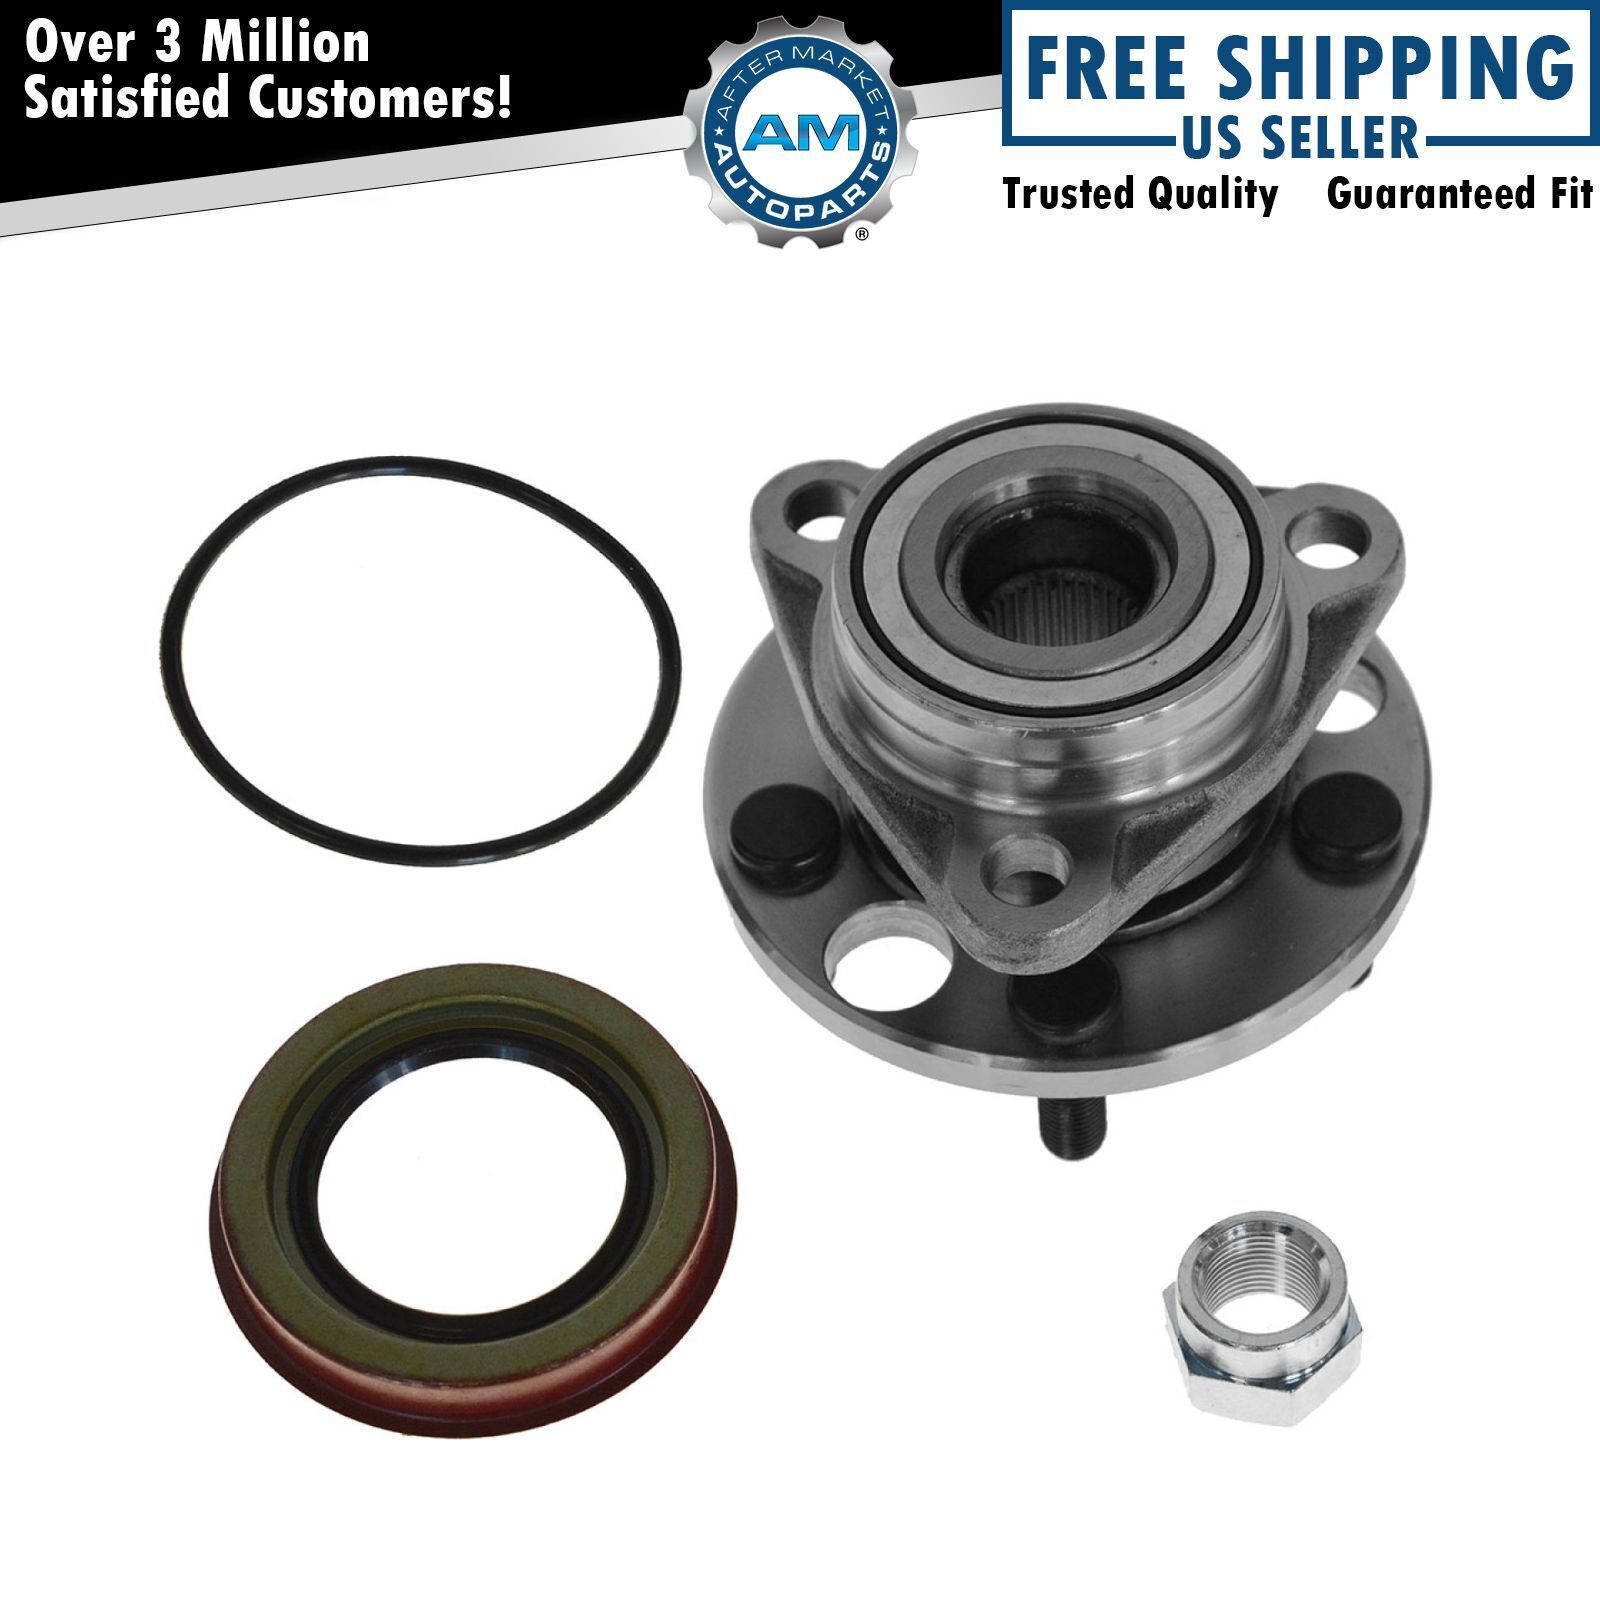 Front Wheel Hub & Bearing NEW for Chevy Cavalier Pontiac Grand Am Buick Olds